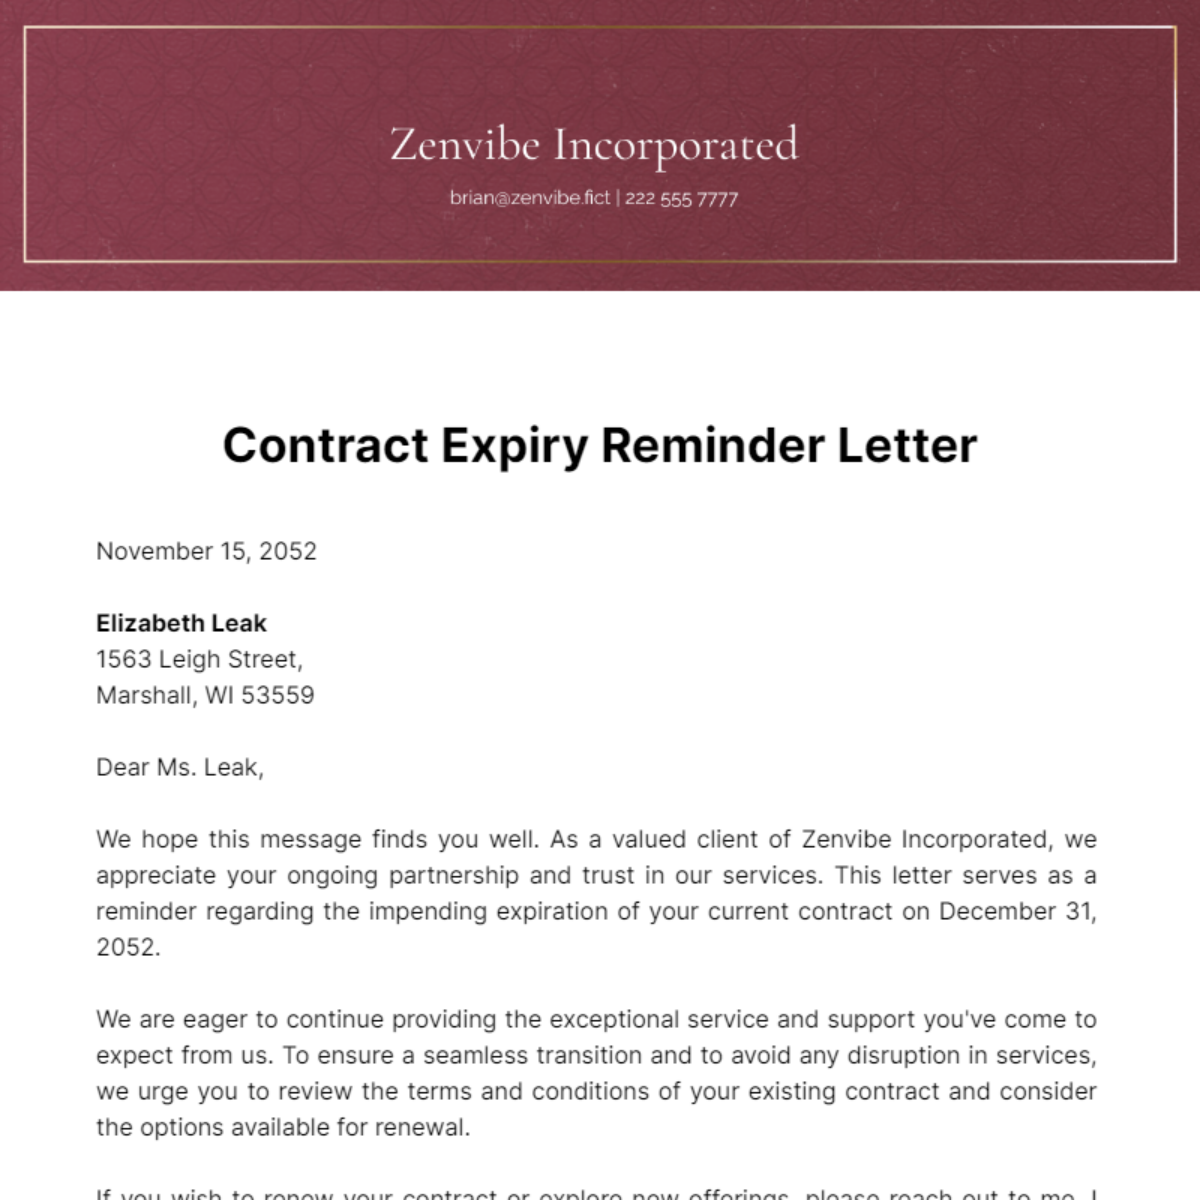 Contract Expiry Reminder Letter Template